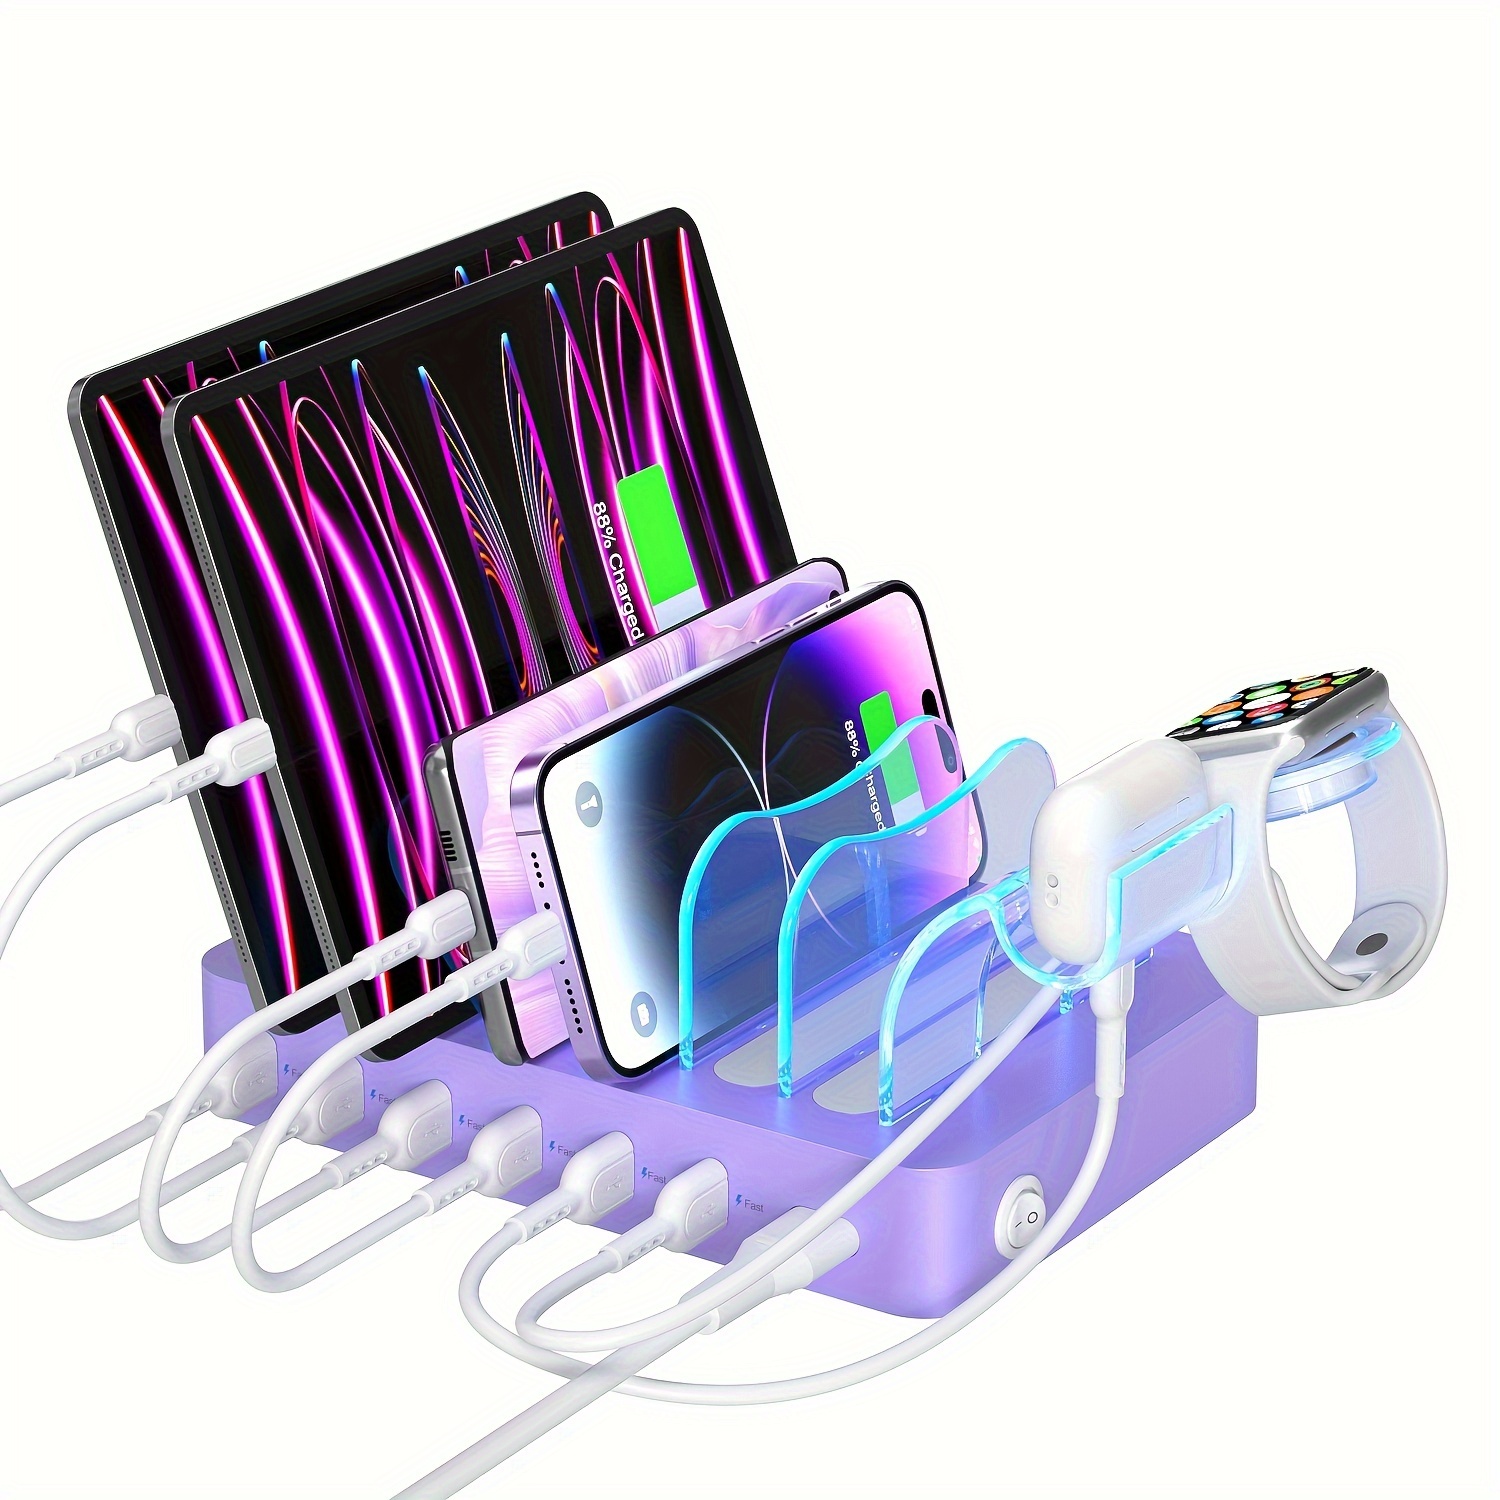 

Soopii Premium 6-port Usb Charging Station Organizer For Multiple Devices, 6 Short Charging Cables And 1 Upgraded L-watch Charger Holder Included, For Phones, Tablets, And Other Electronics